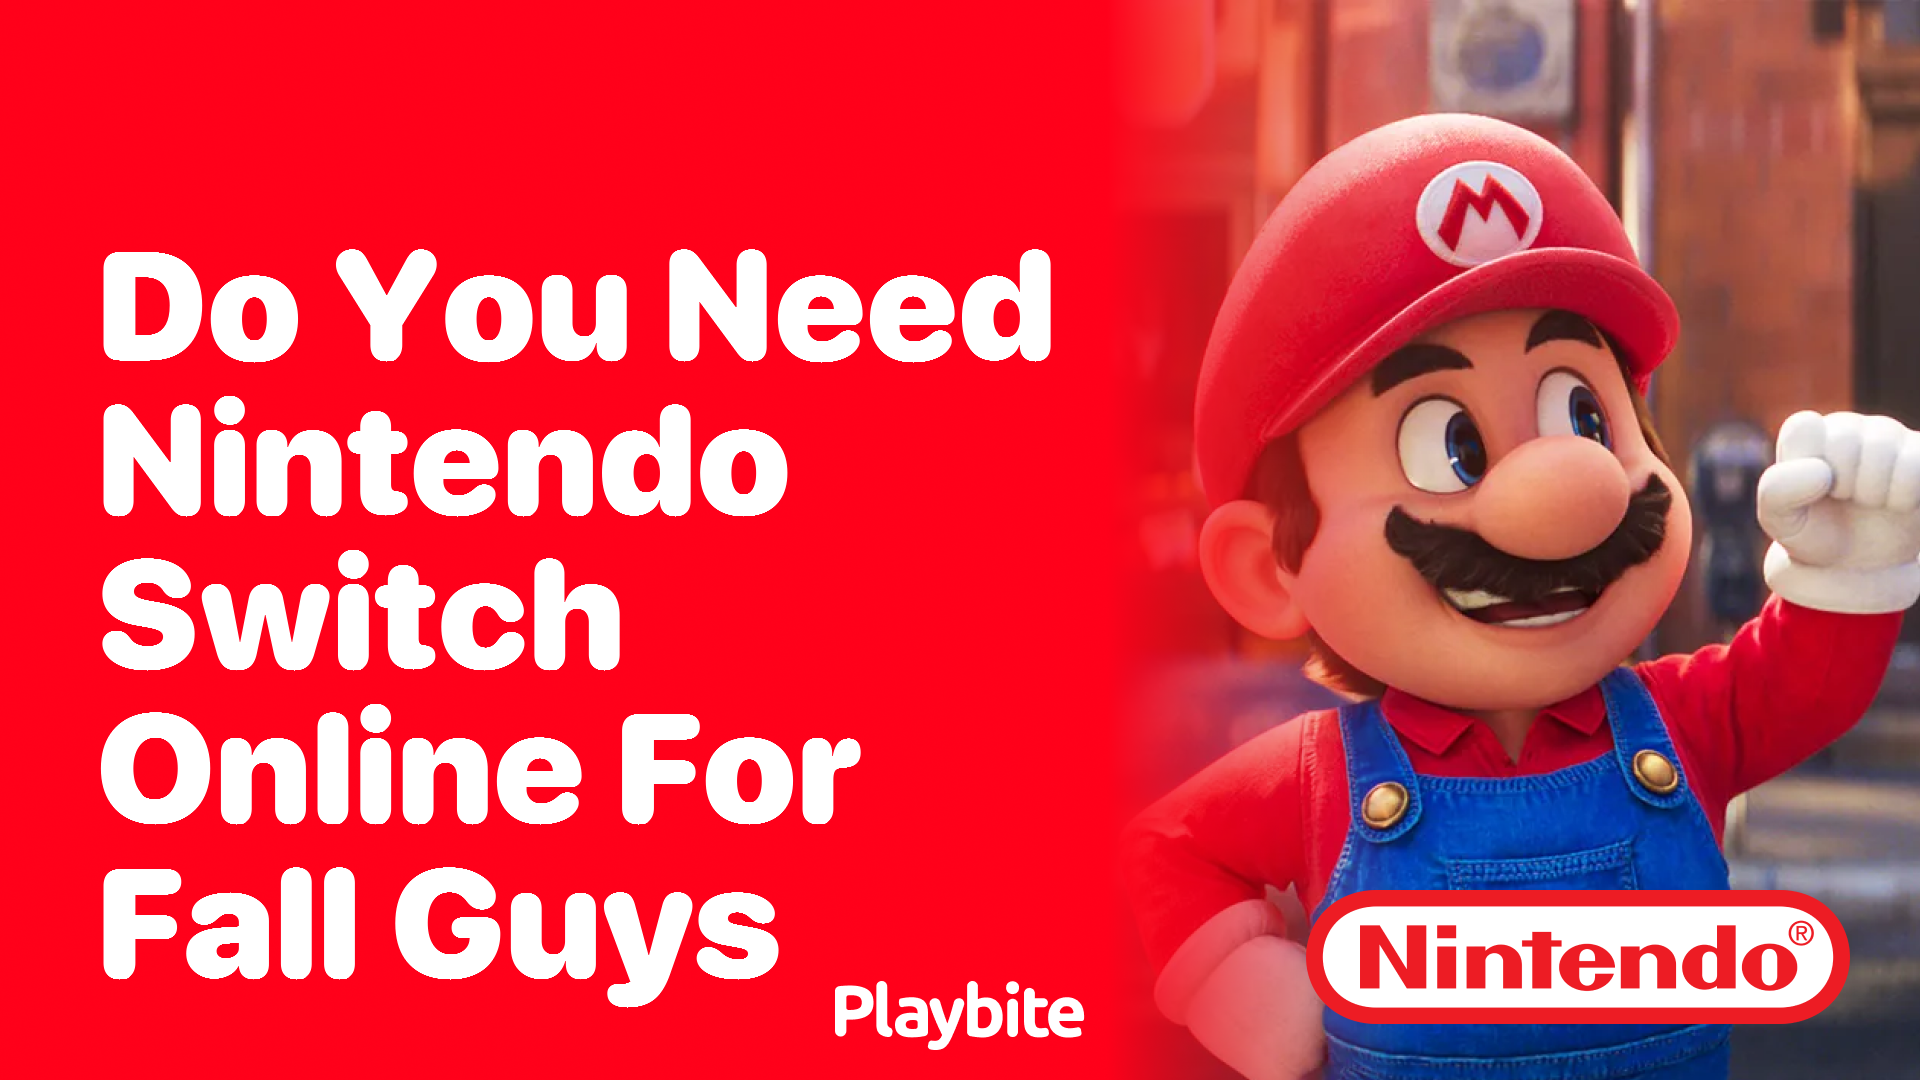 Do You Need Nintendo Switch Online to Play Fall Guys?